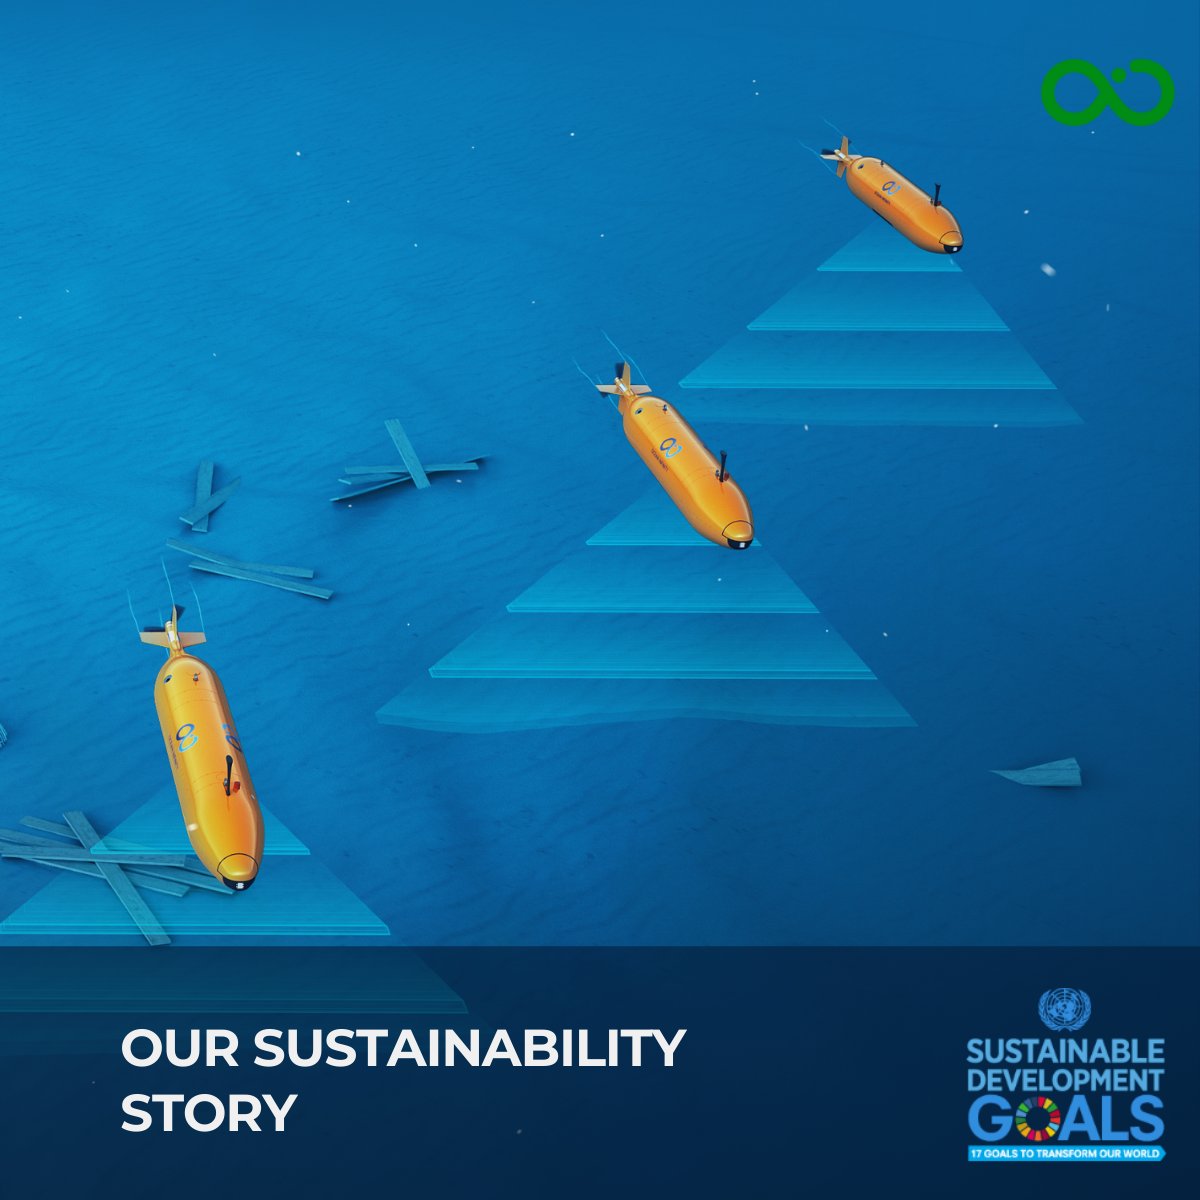 3/3 Our search for MH370 in 2018 used 80% less fuel and emitted 72% less CO2 than an average survey vessel. Since then, all our efforts have been focused on creating greener, safer, and smarter operations, leading us to build the first ever carbon neutral fleet of #robotic ships.